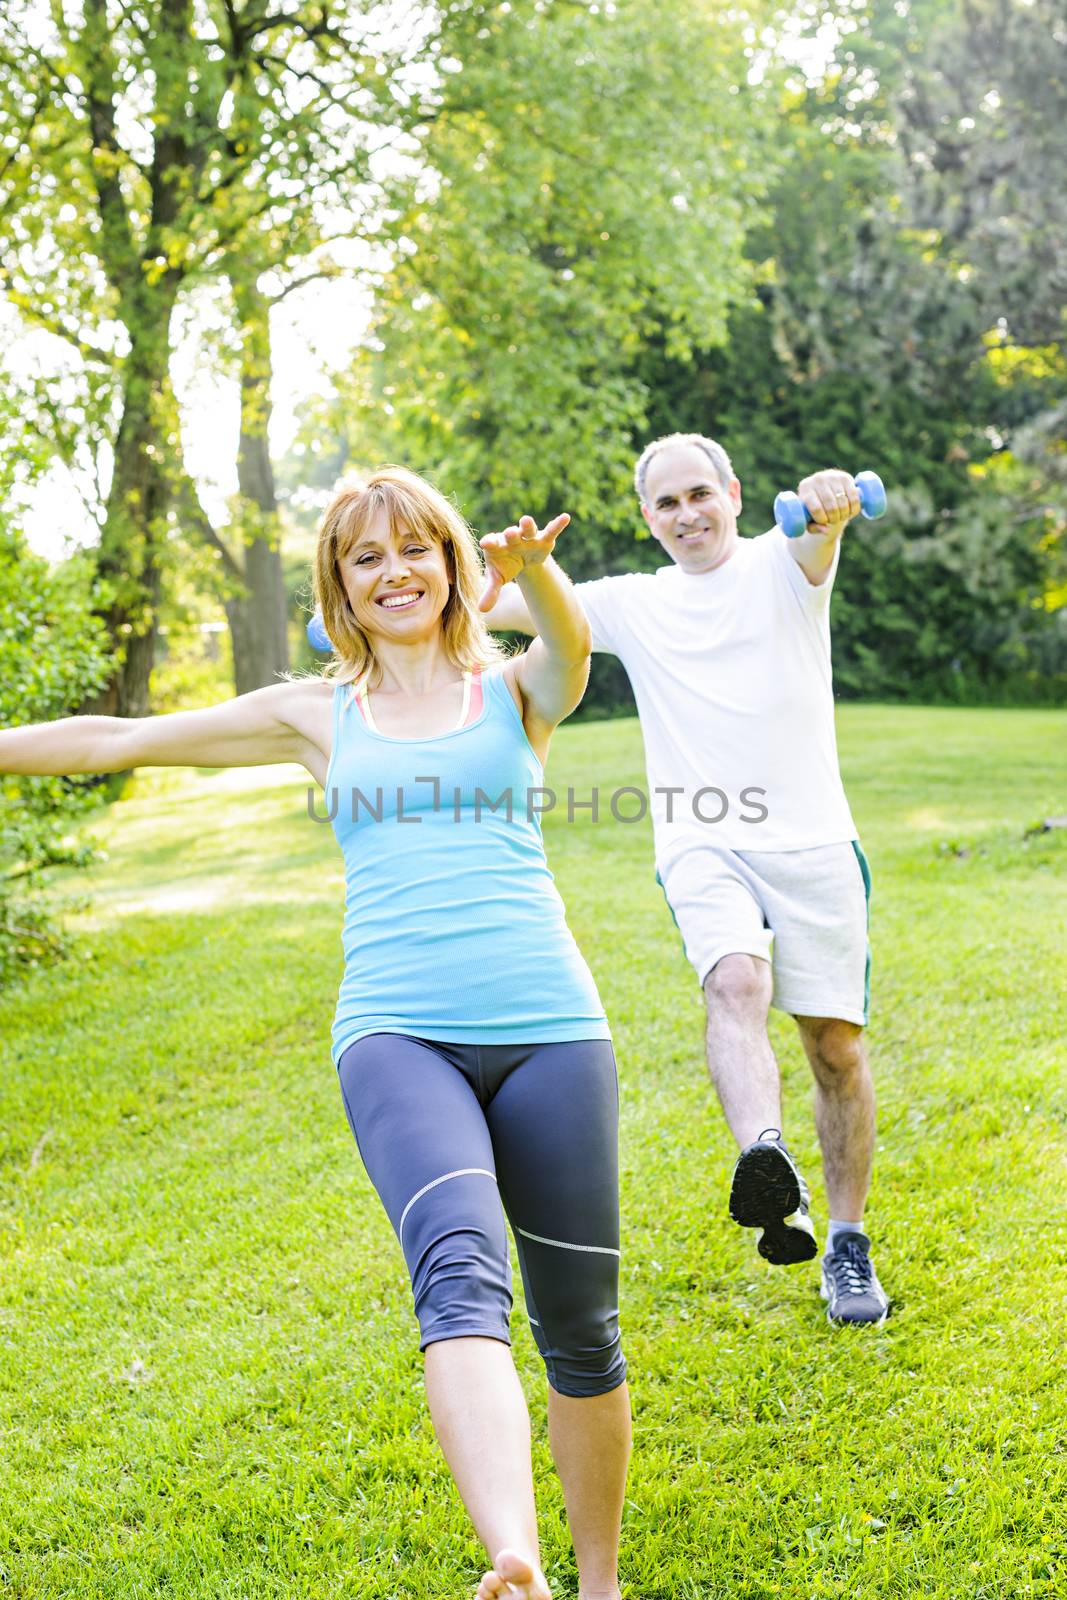 Female fitness instructor exercising with middle aged man outdoors in green park